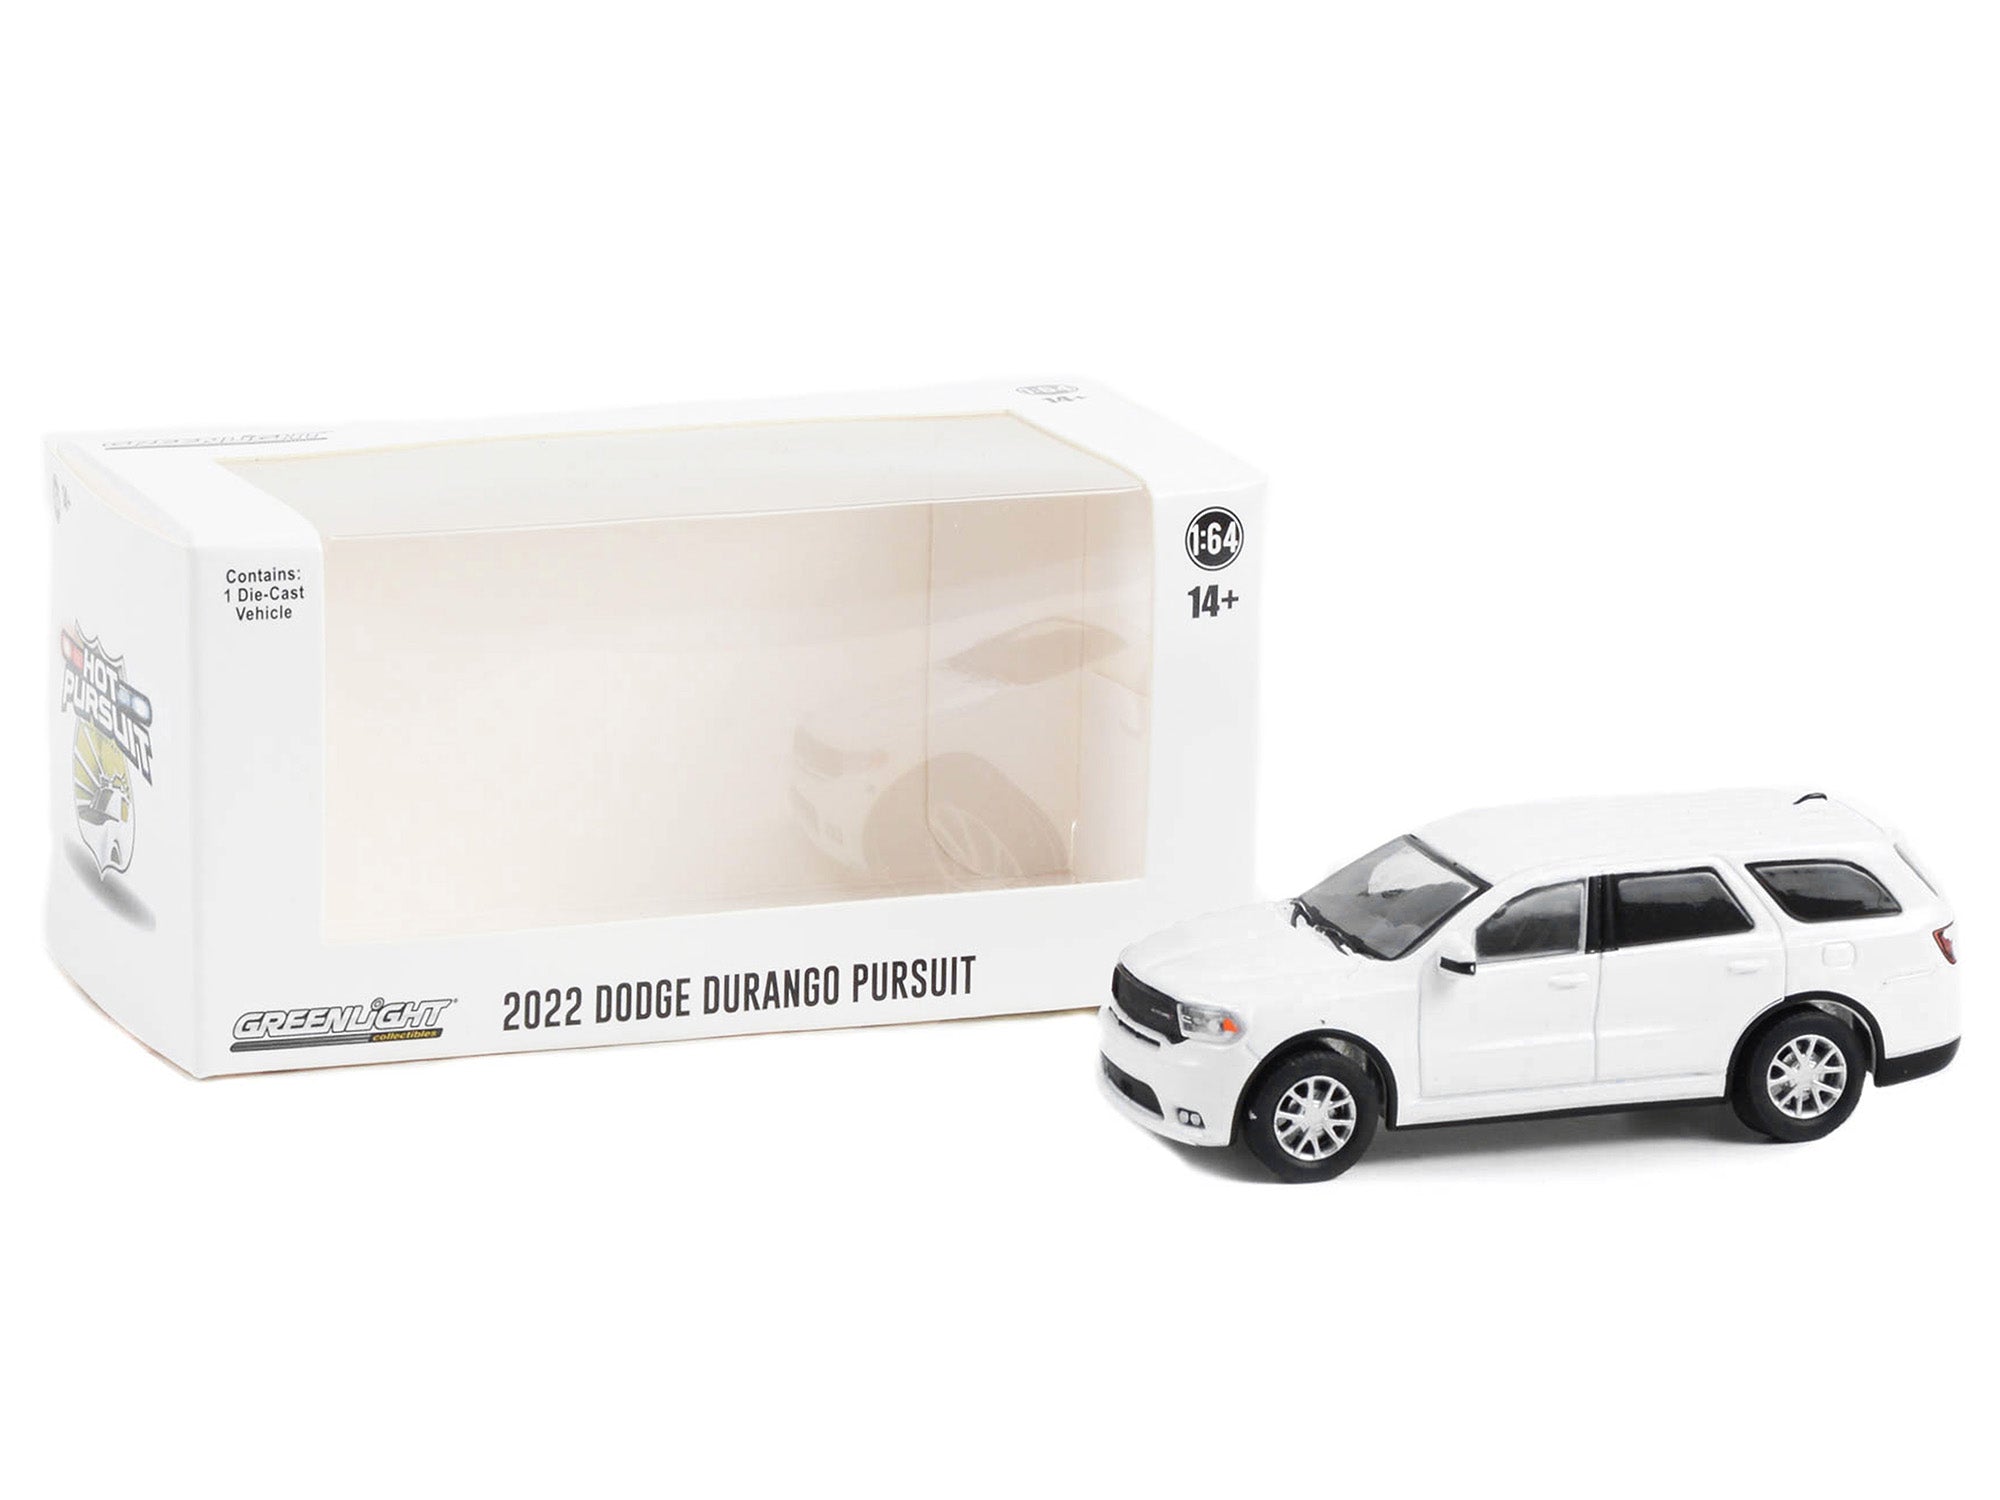 2022 Dodge Durango Pursuit Police Car White "Hot Pursuit" "Hobby Exclusive" Series 1/64 Diecast Model Car by Greenlight